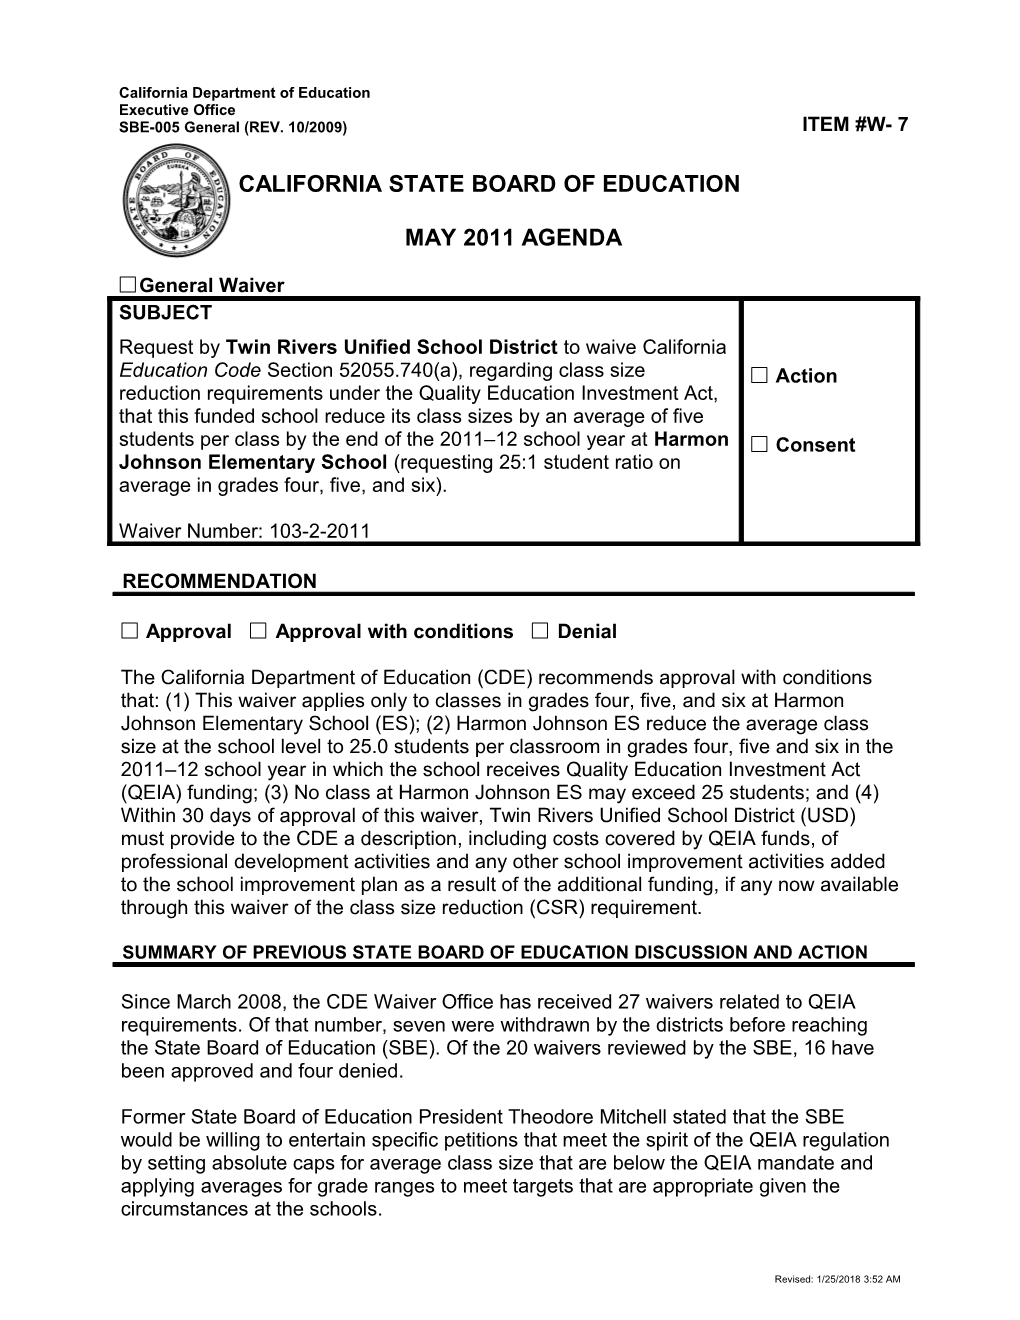 May 2011 Agenda Item W7 - Meeting Agendas (CA State Board of Education)